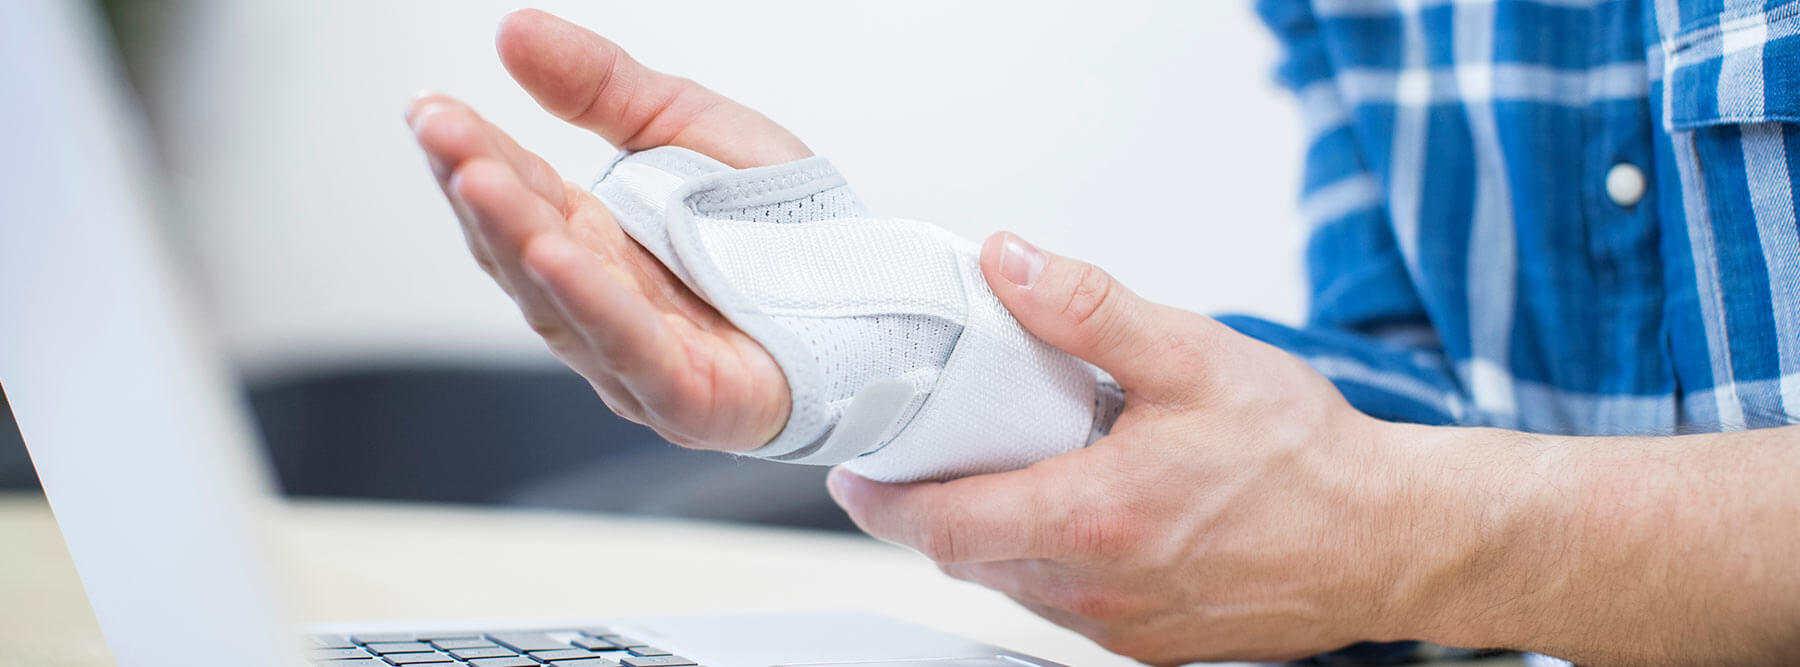 Man suffering from Repetitive Strain Injury (RSI)